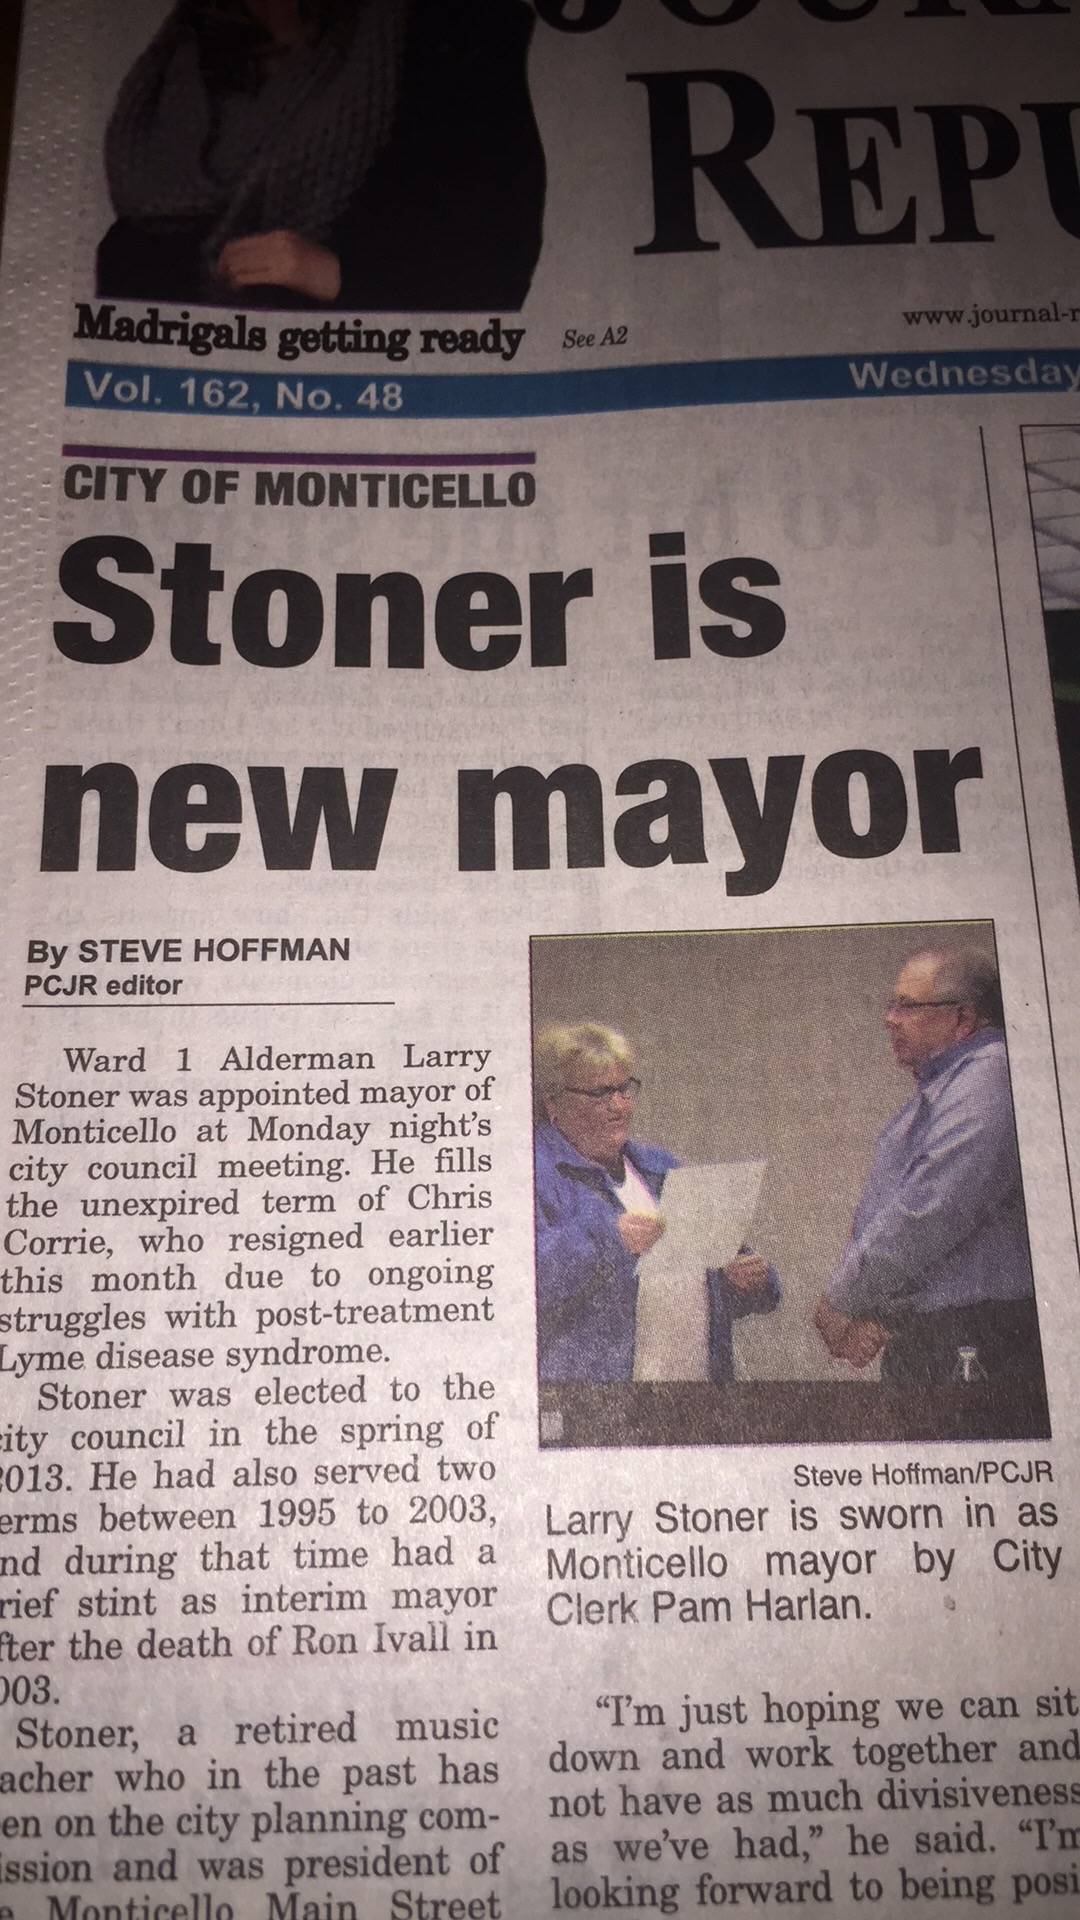 Oh hell yeah, Stoner is the new Mayor in Monticello